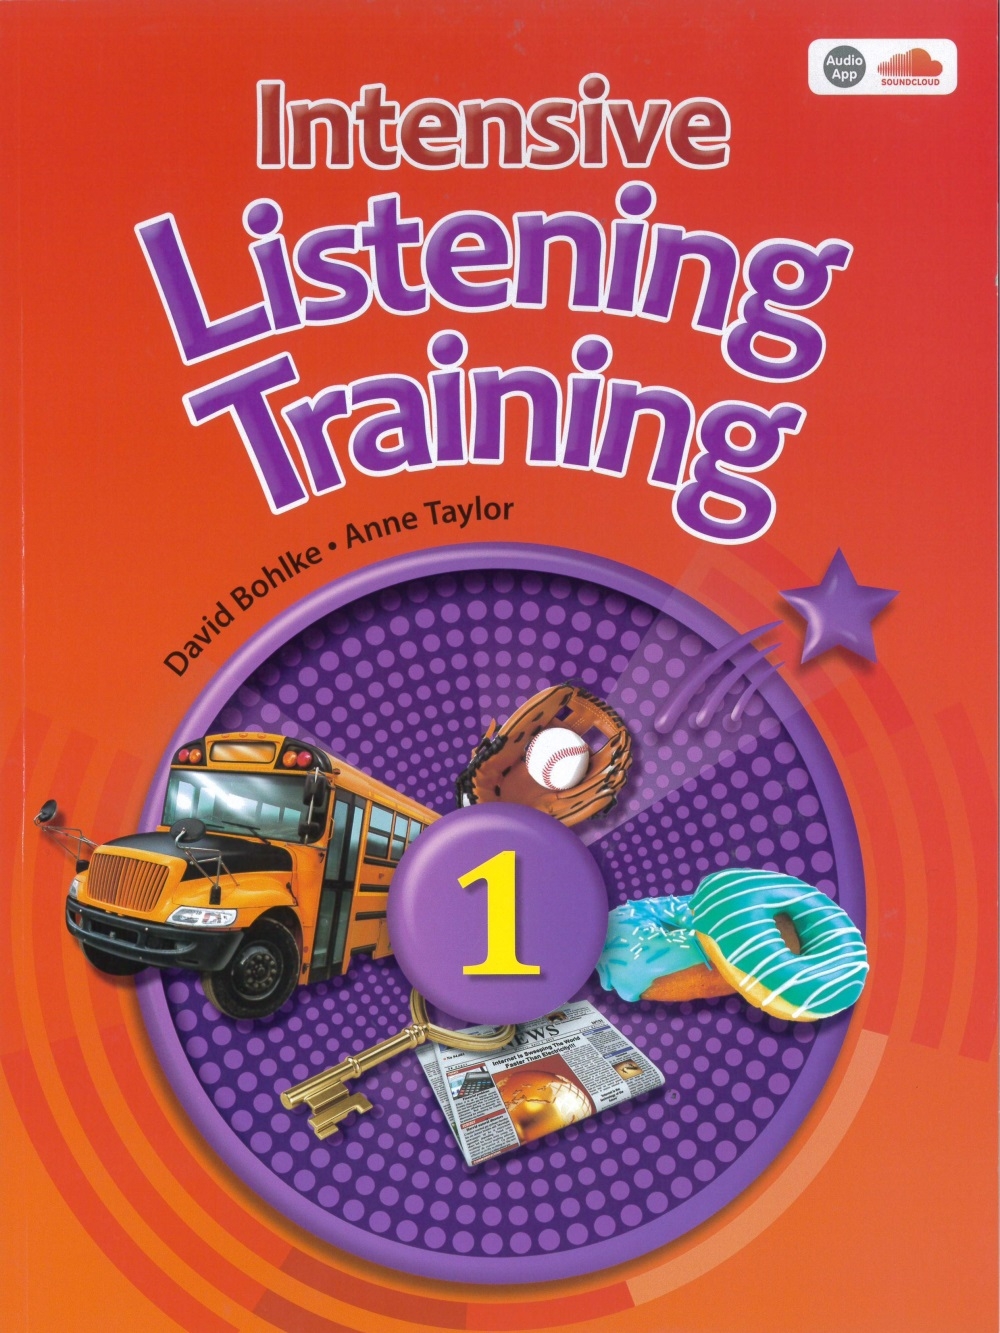 Intensive Listening Training (1) with Audio App and Answer Key